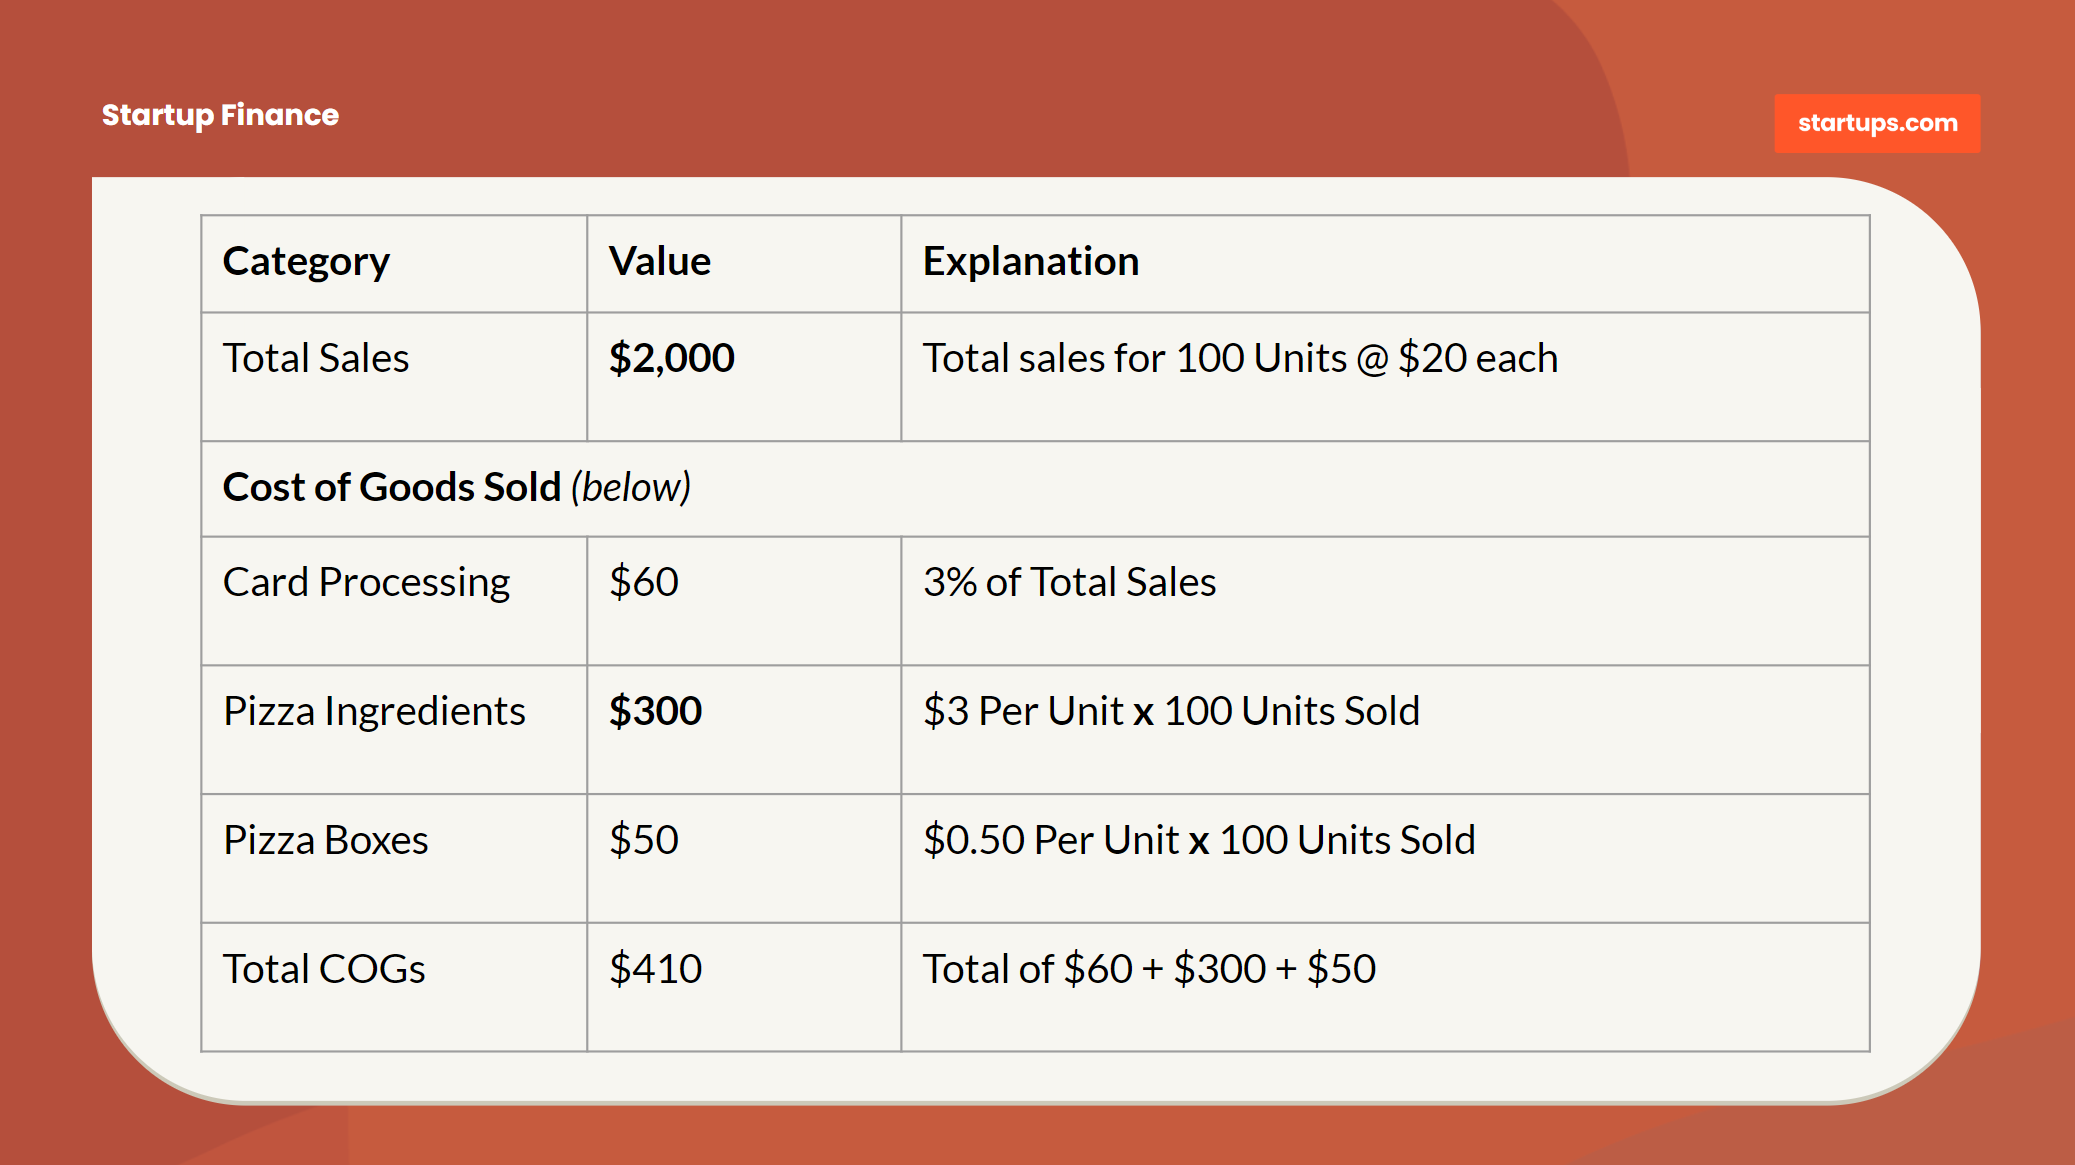 The average cost method we're using considers the total cost of each unit shipped within a specific purchase date.